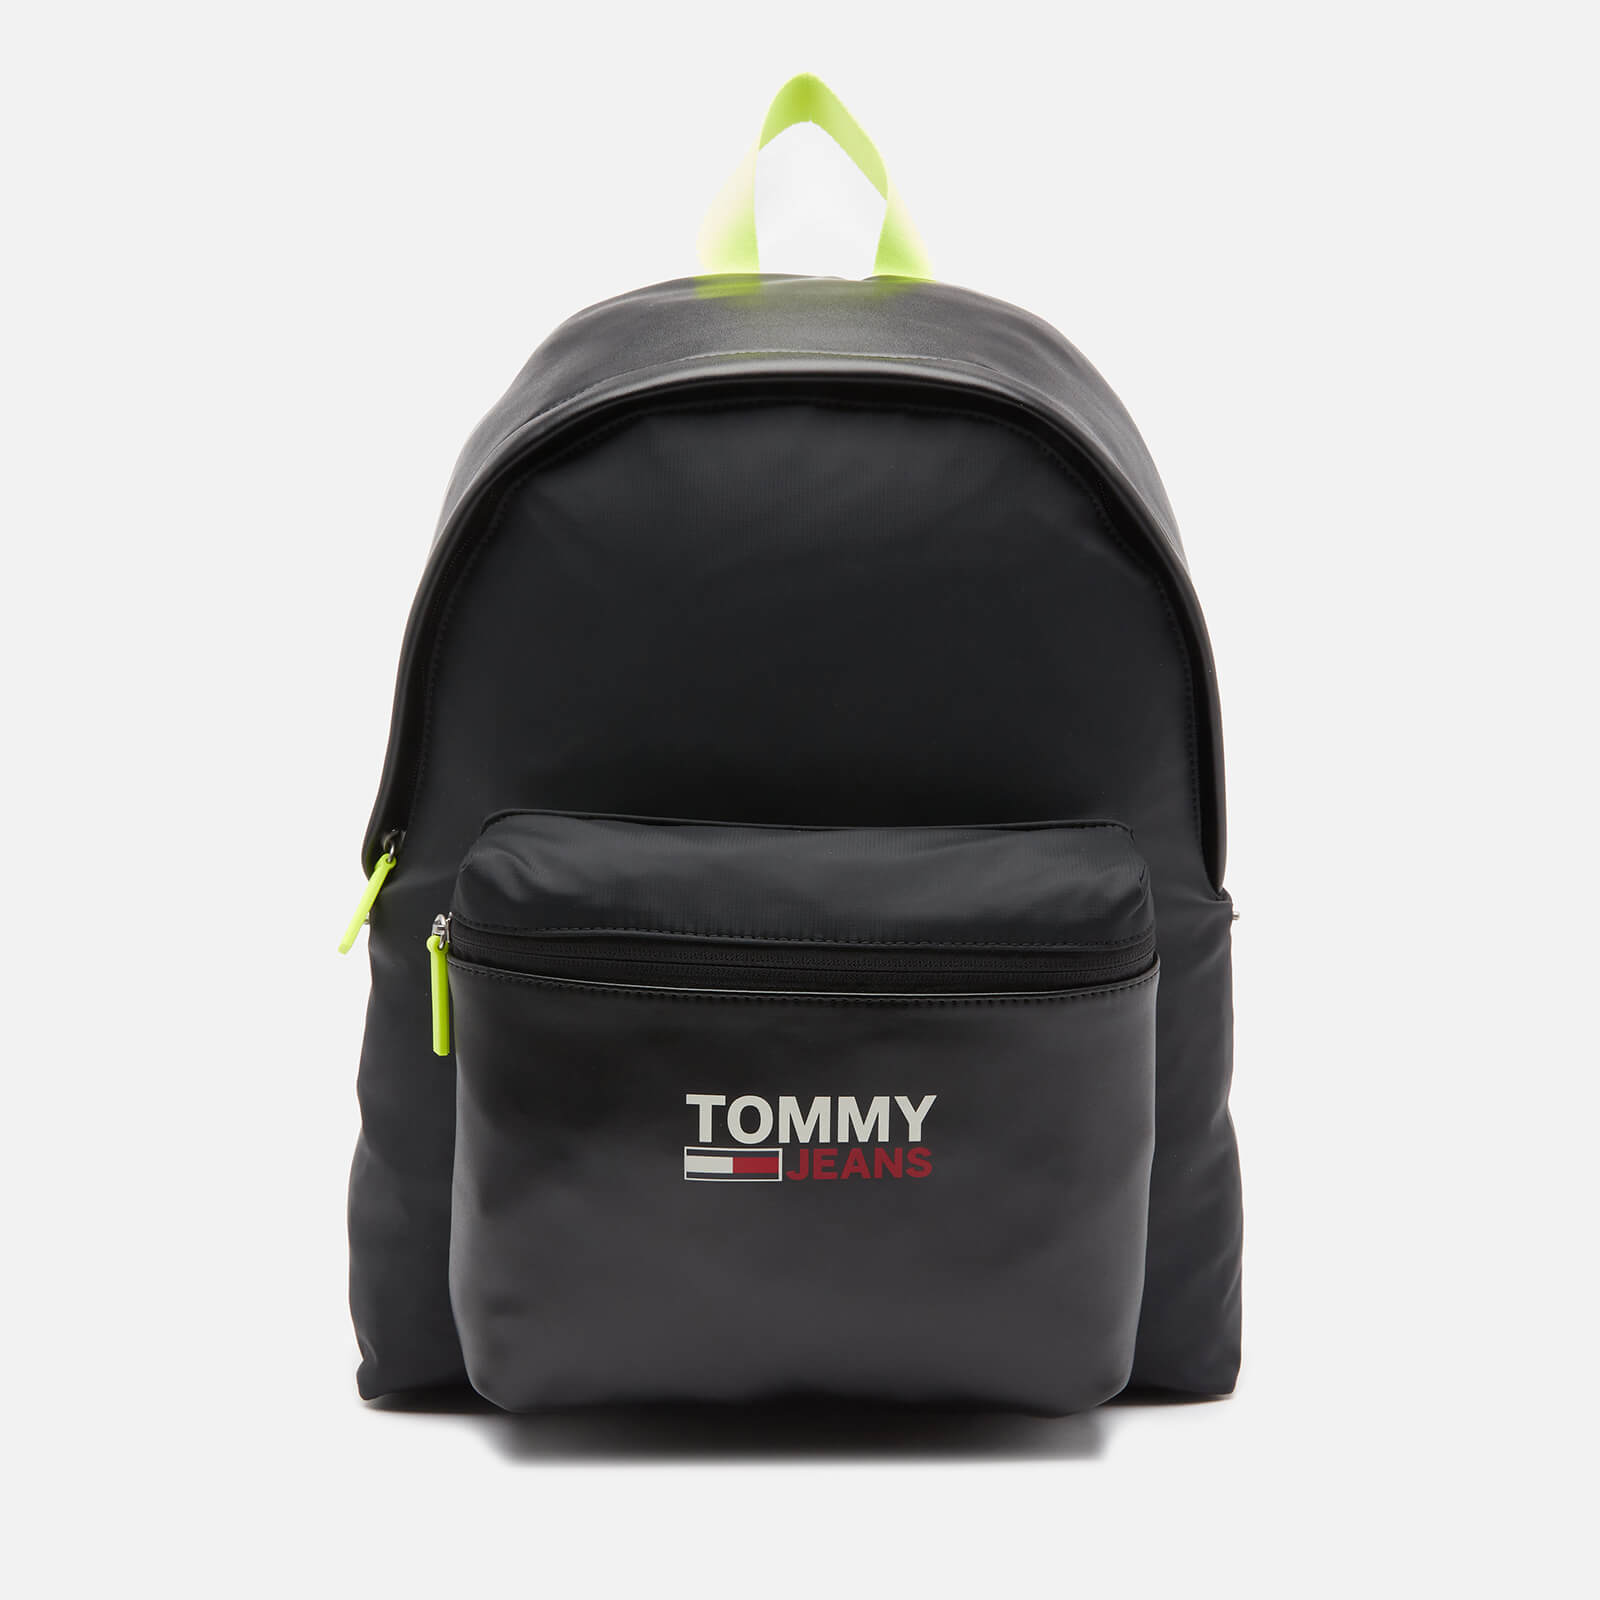 Tommy Jeans Men's Campus Twist Dome Backpack - Black